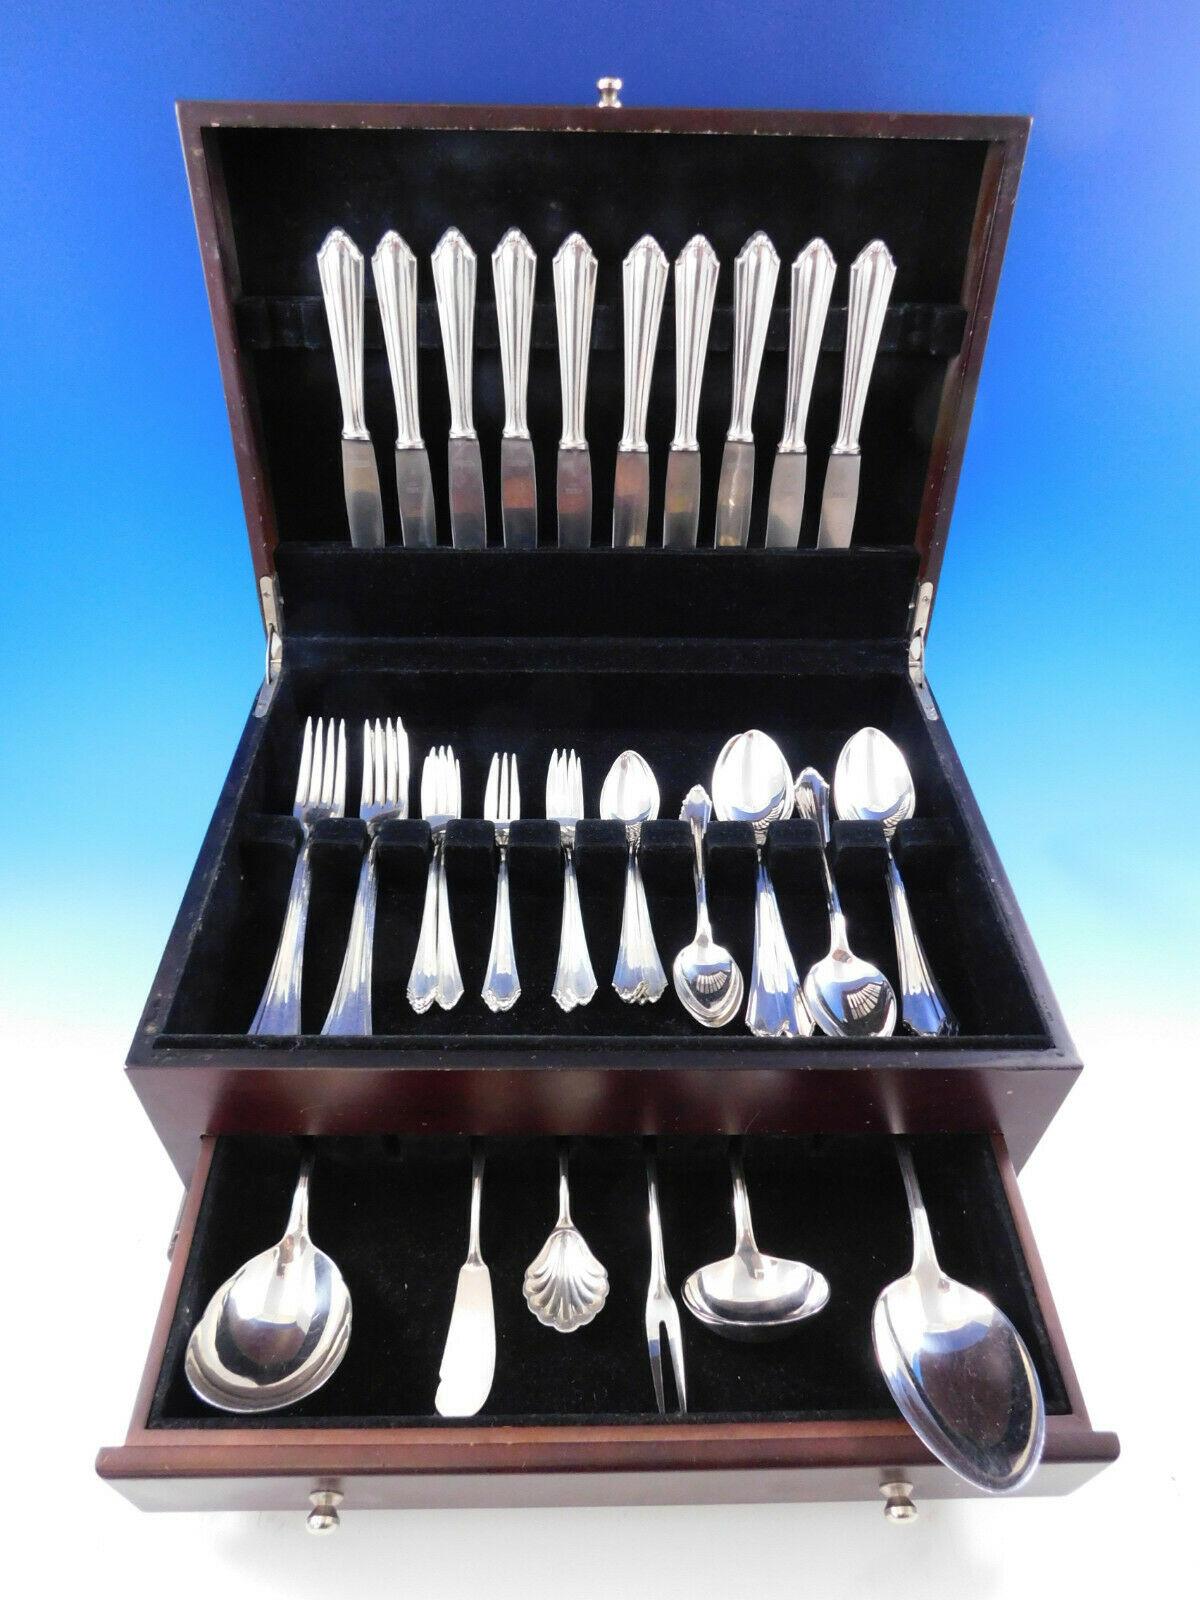 Friederike by Bremer (BSF) 800 silver German flatware set with clasic and timeless design - 56 pieces. This set includes:

10 knives, 8 1/2